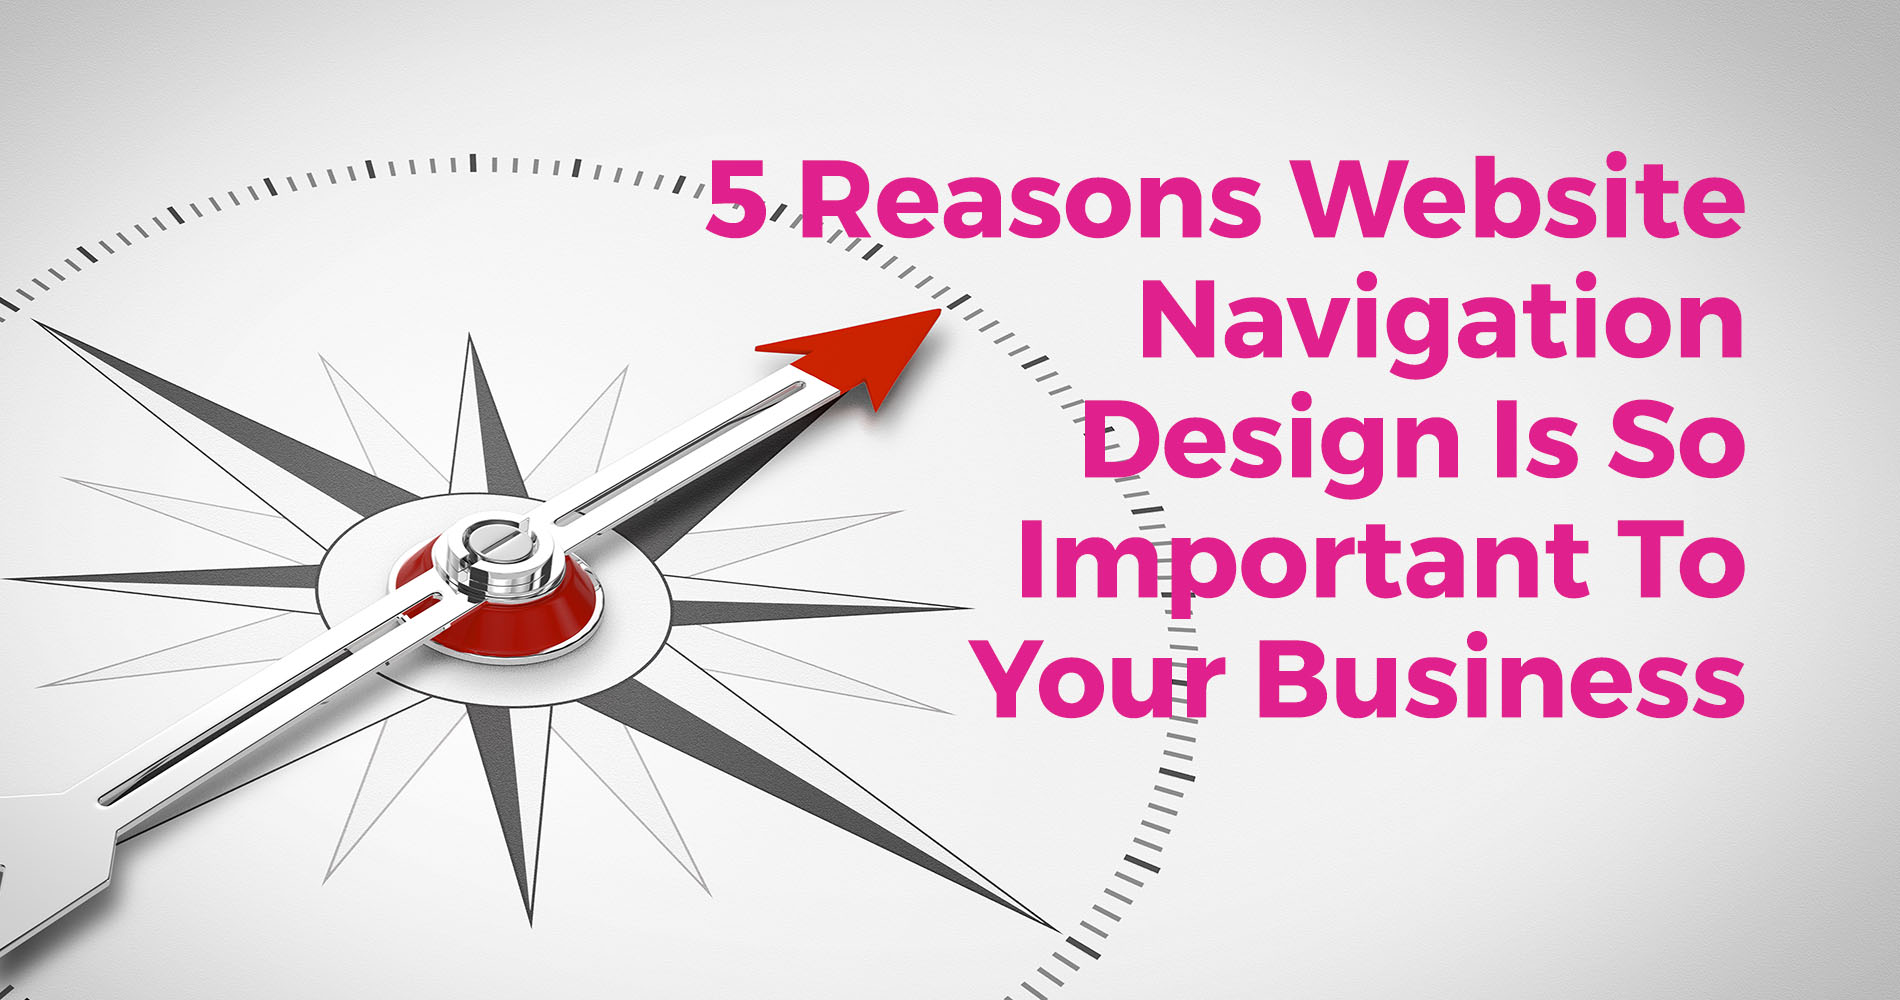 5 Reasons Website Navigation Design Is So Important To Your Business